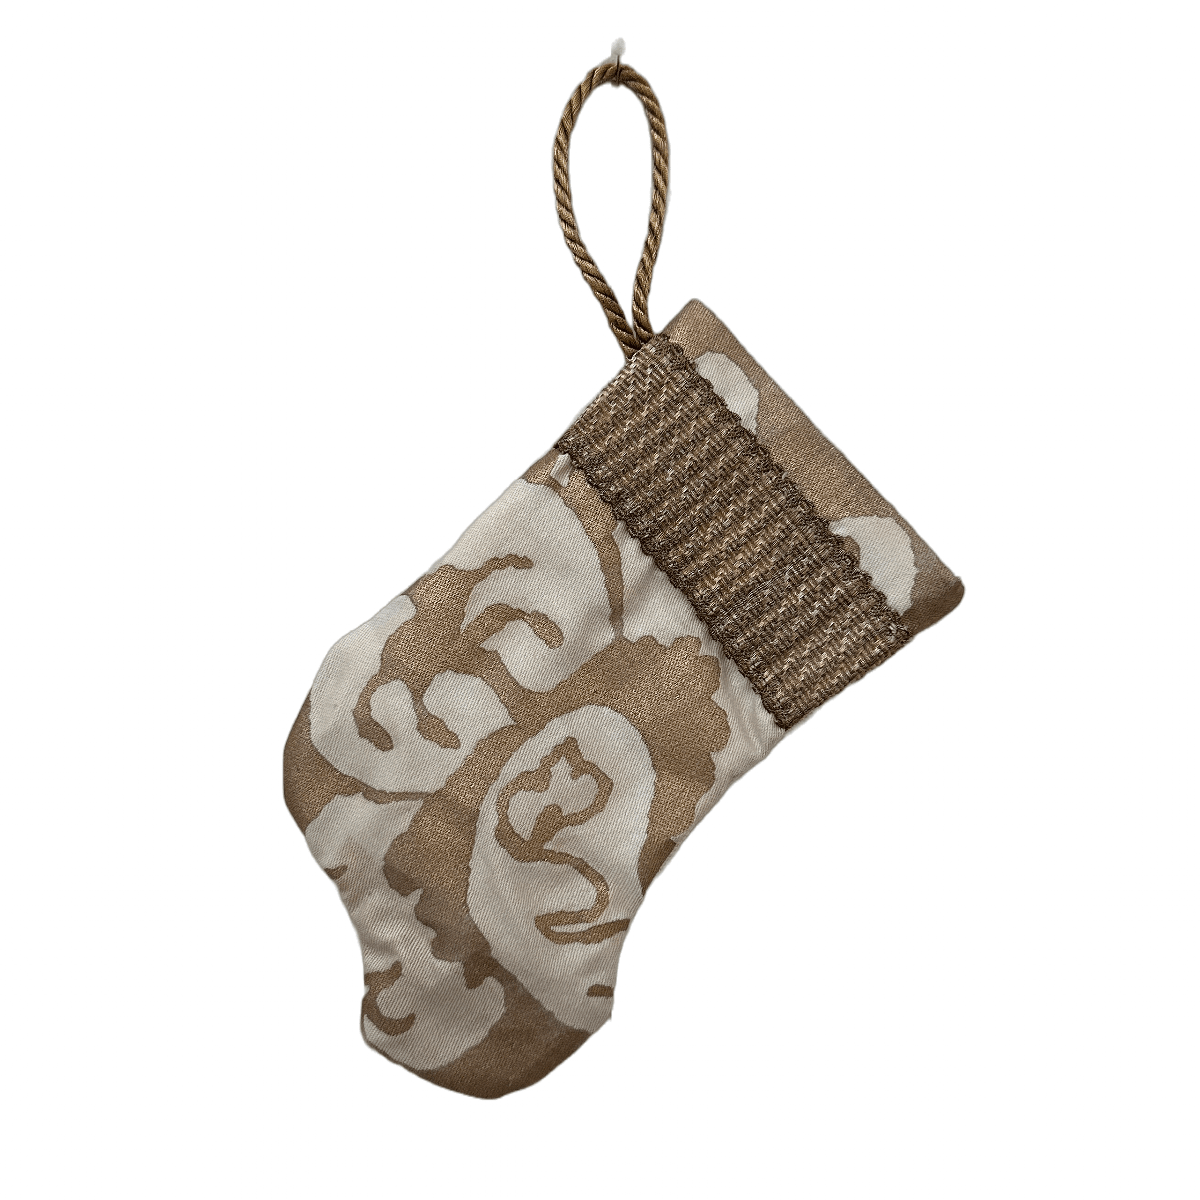 Handmade Mini Stocking Ornament from Antique & Vintage Textiles, Trims | White and Gold Fortuny Ornament B. Viz Design D 